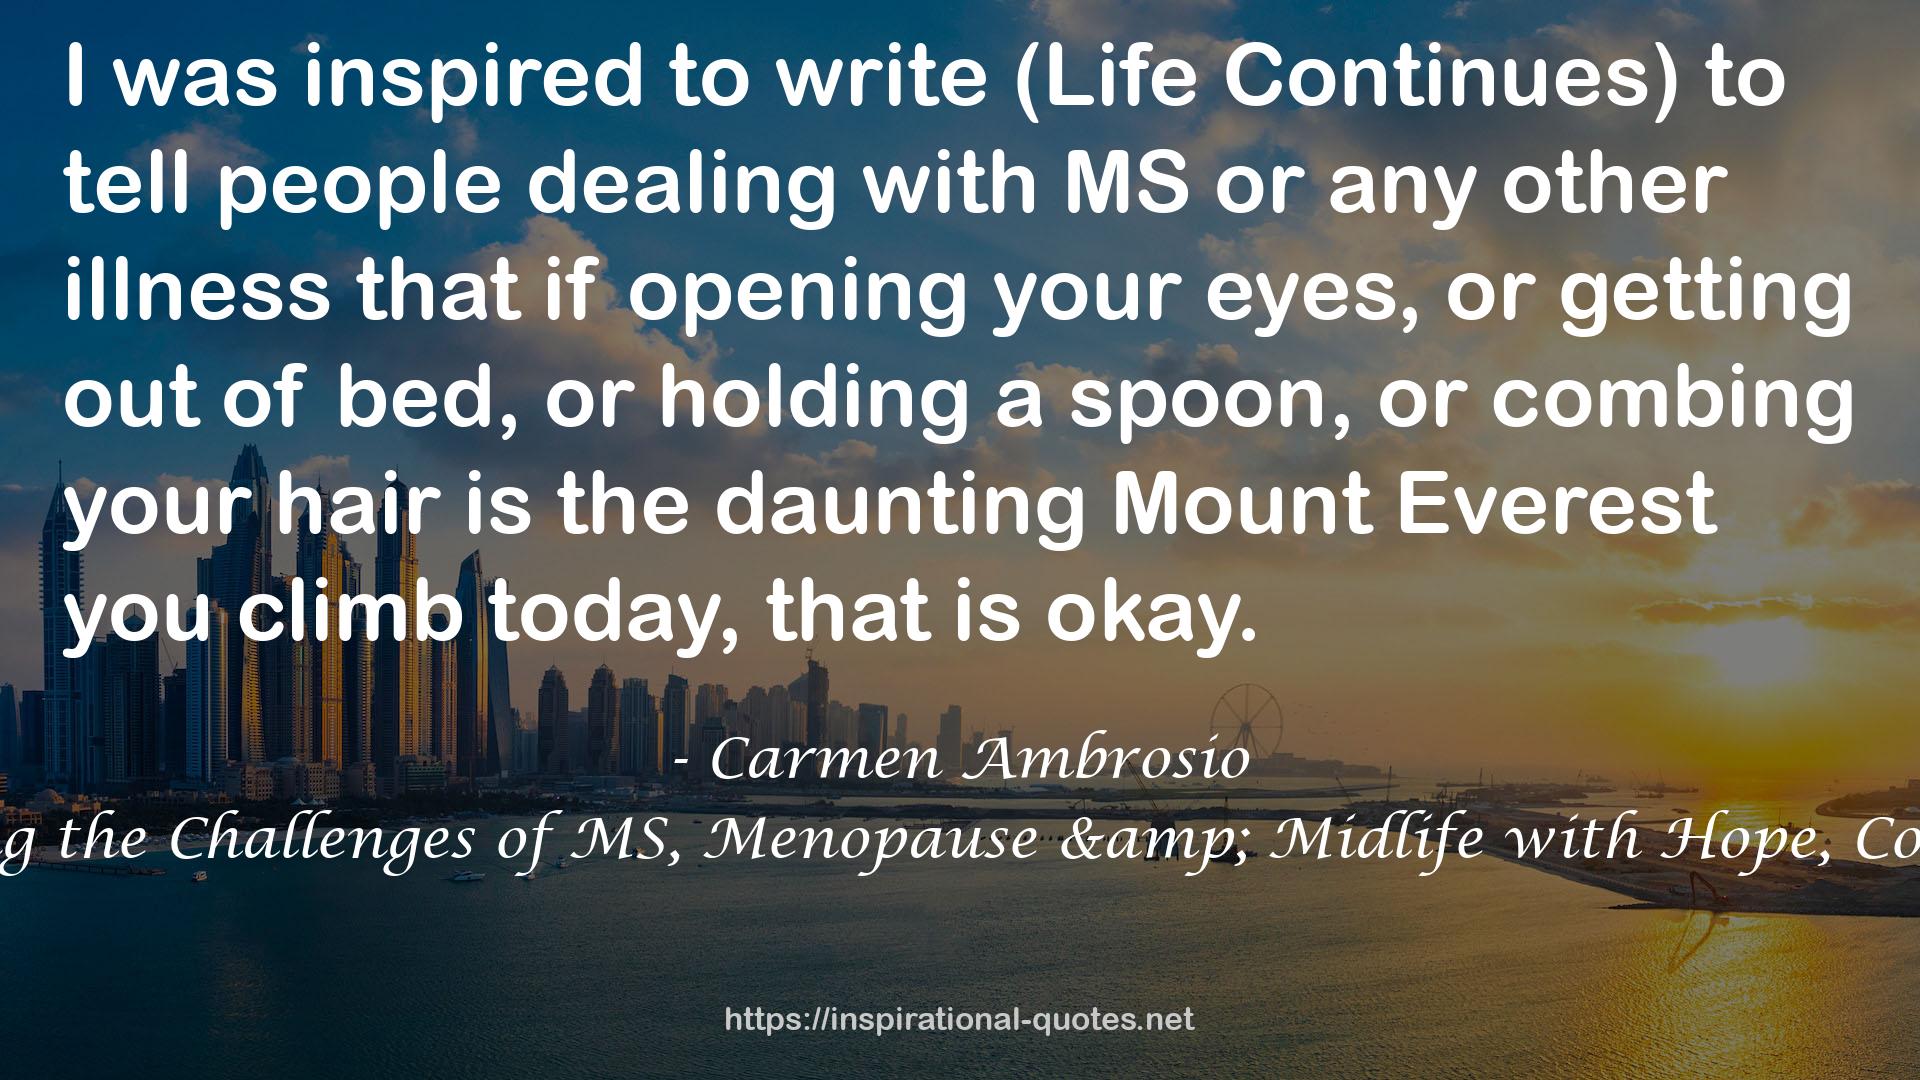 Life Continues: Facing the Challenges of MS, Menopause & Midlife with Hope, Courage & Humor QUOTES